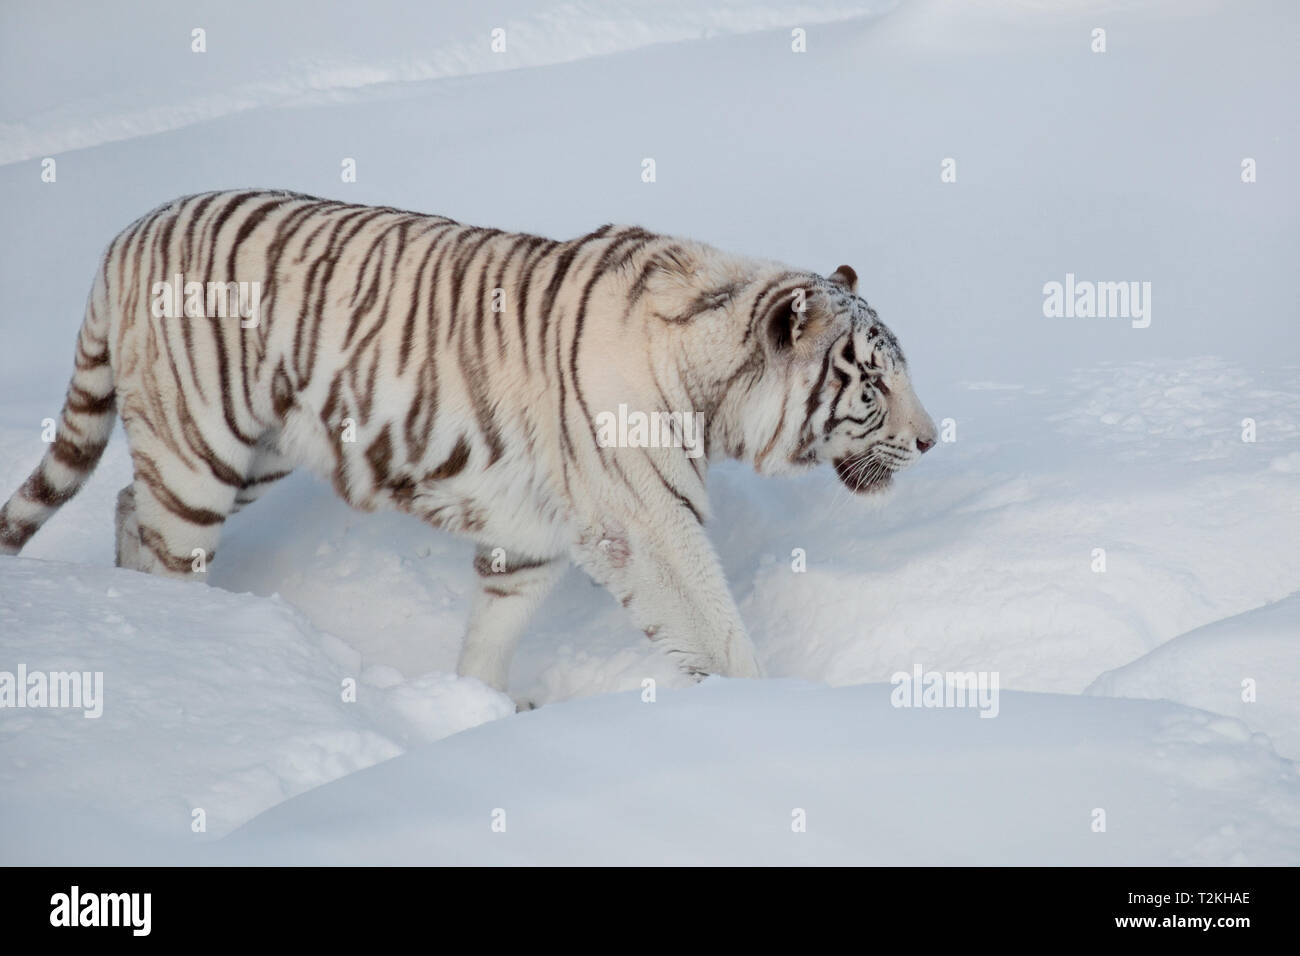 Wild white bengal tiger is walking on a white snow in the park. Animals in wildlife. Stock Photo